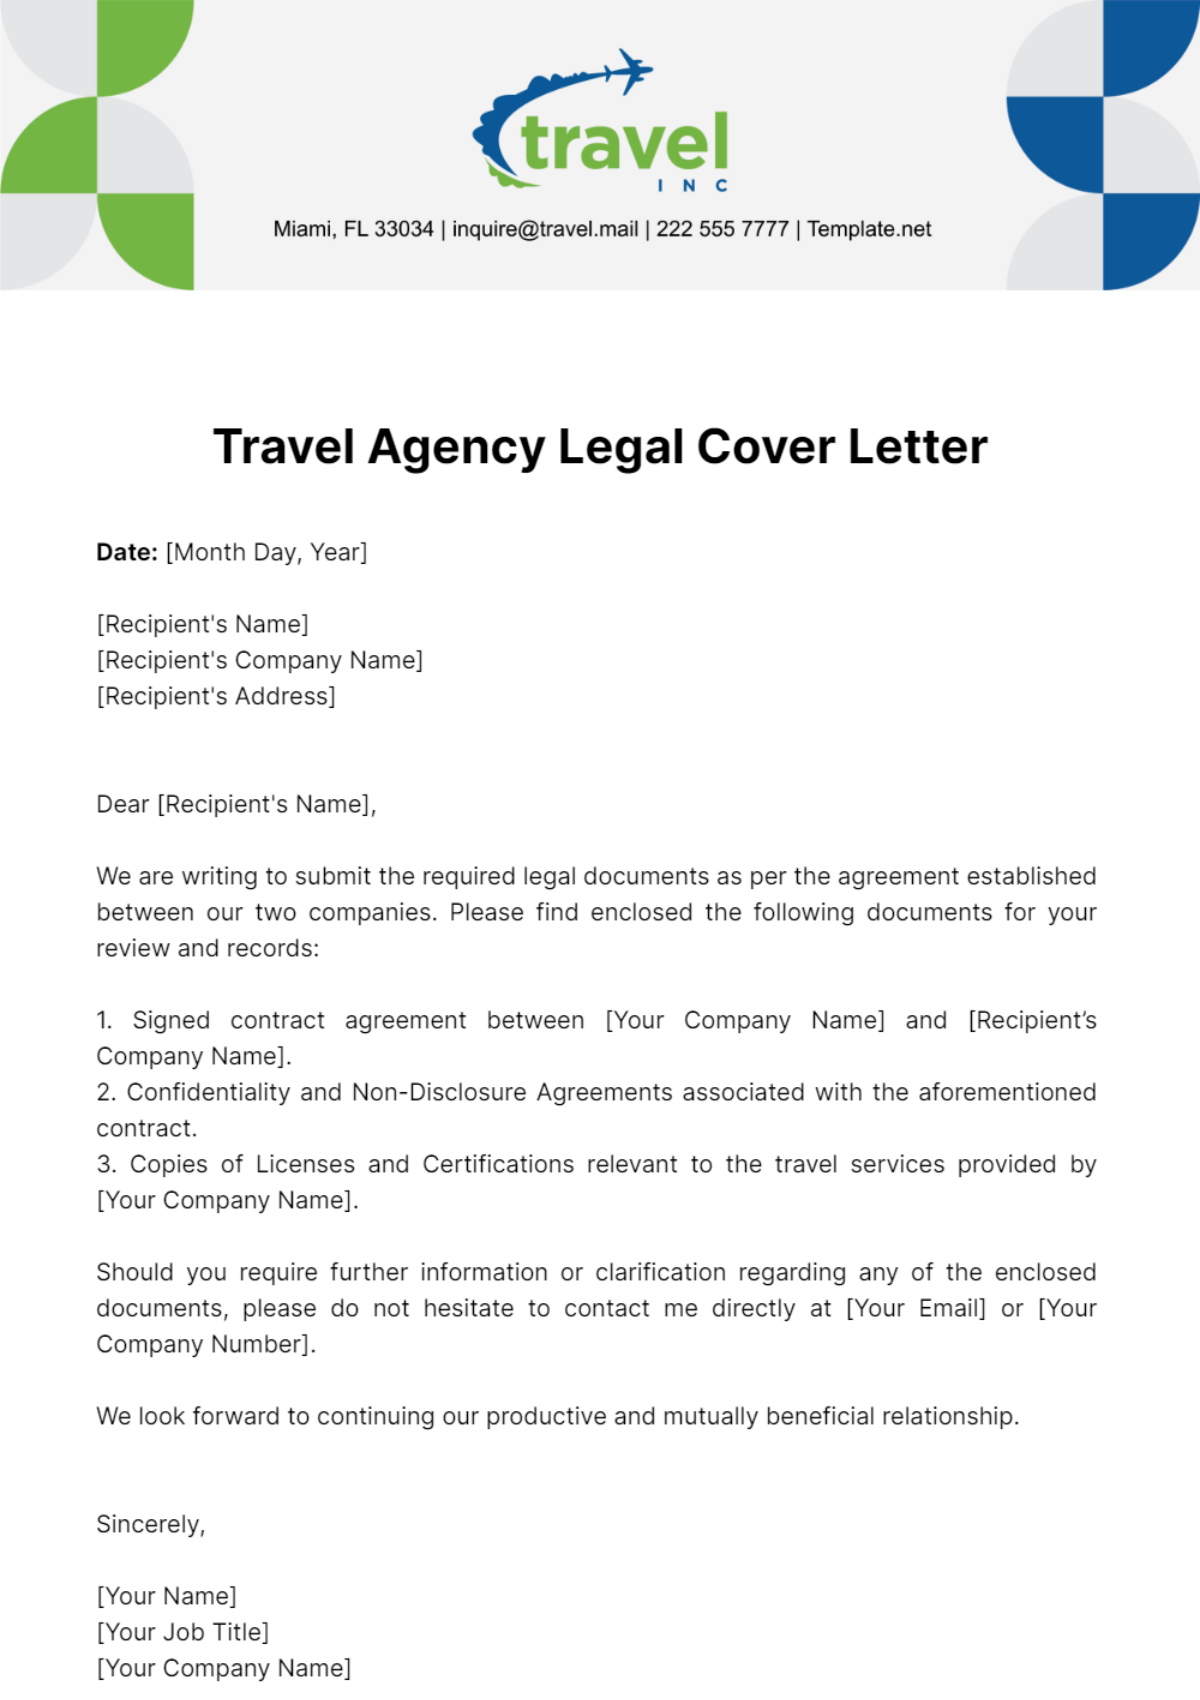 Travel Agency Legal Cover Letter Template